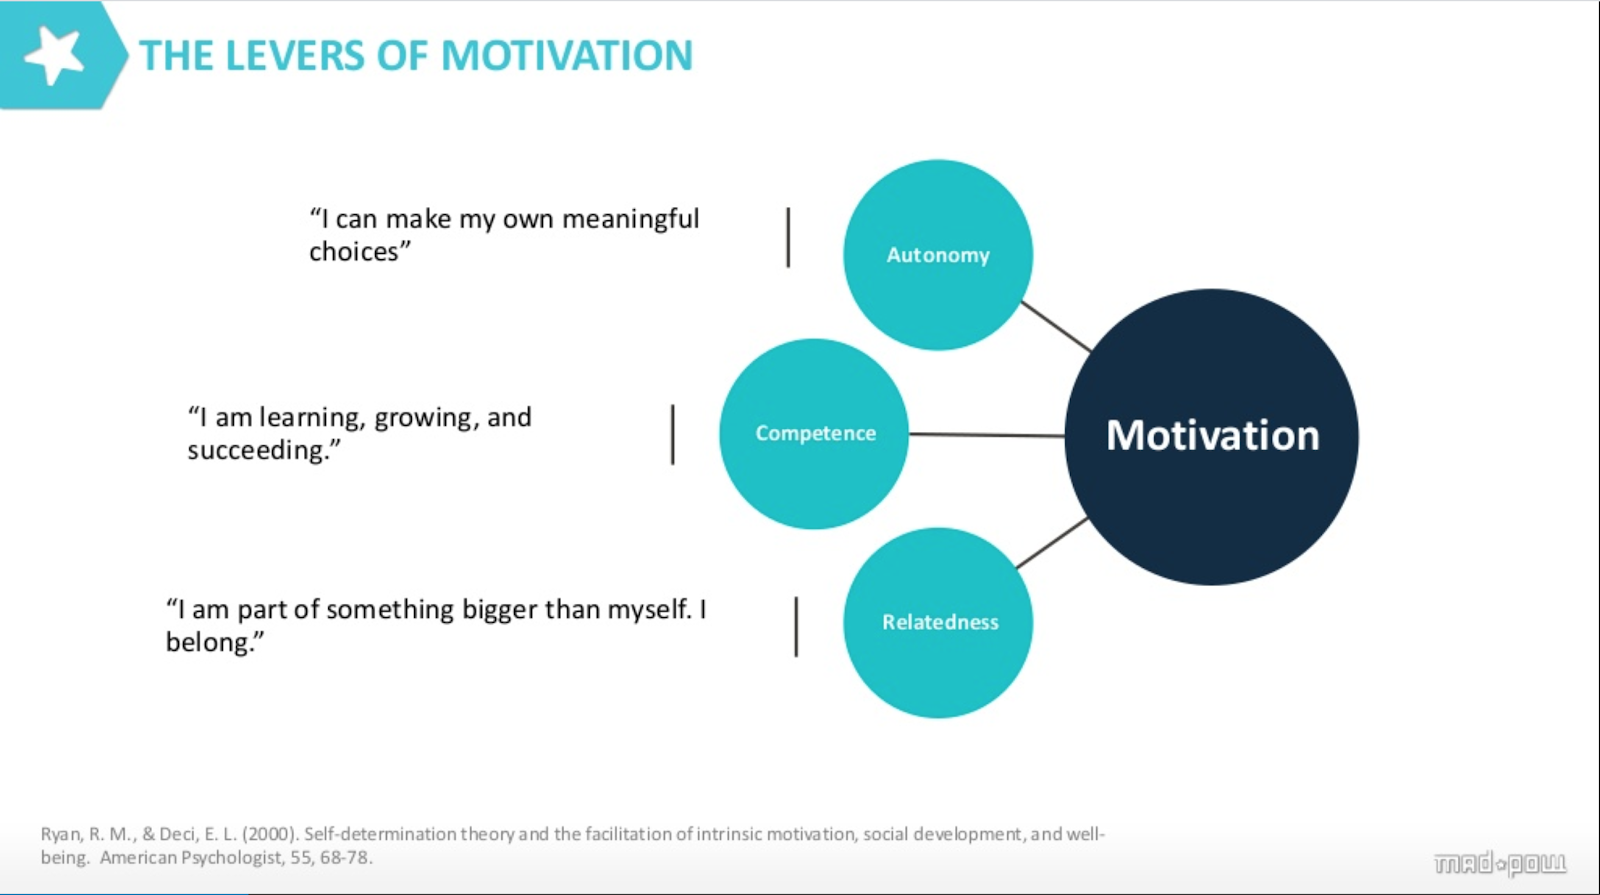 In the self determination theory, motivation has three key levers, informed by basic psychological needs of autonomy, competence and relatedness.